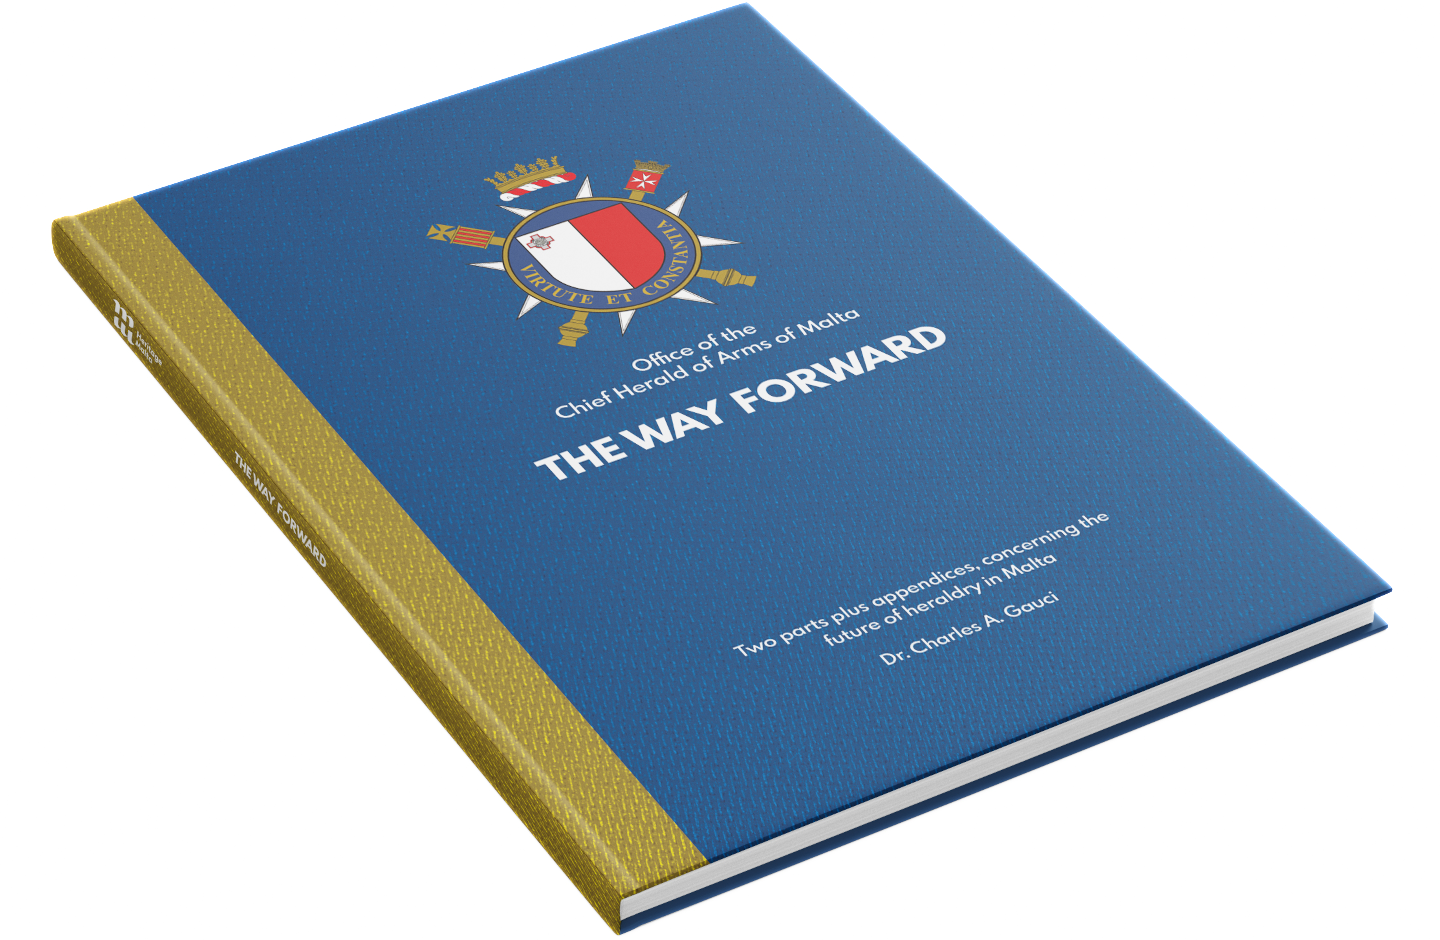 Office of the Chief Herald of Arms of Malta: The Way Forward